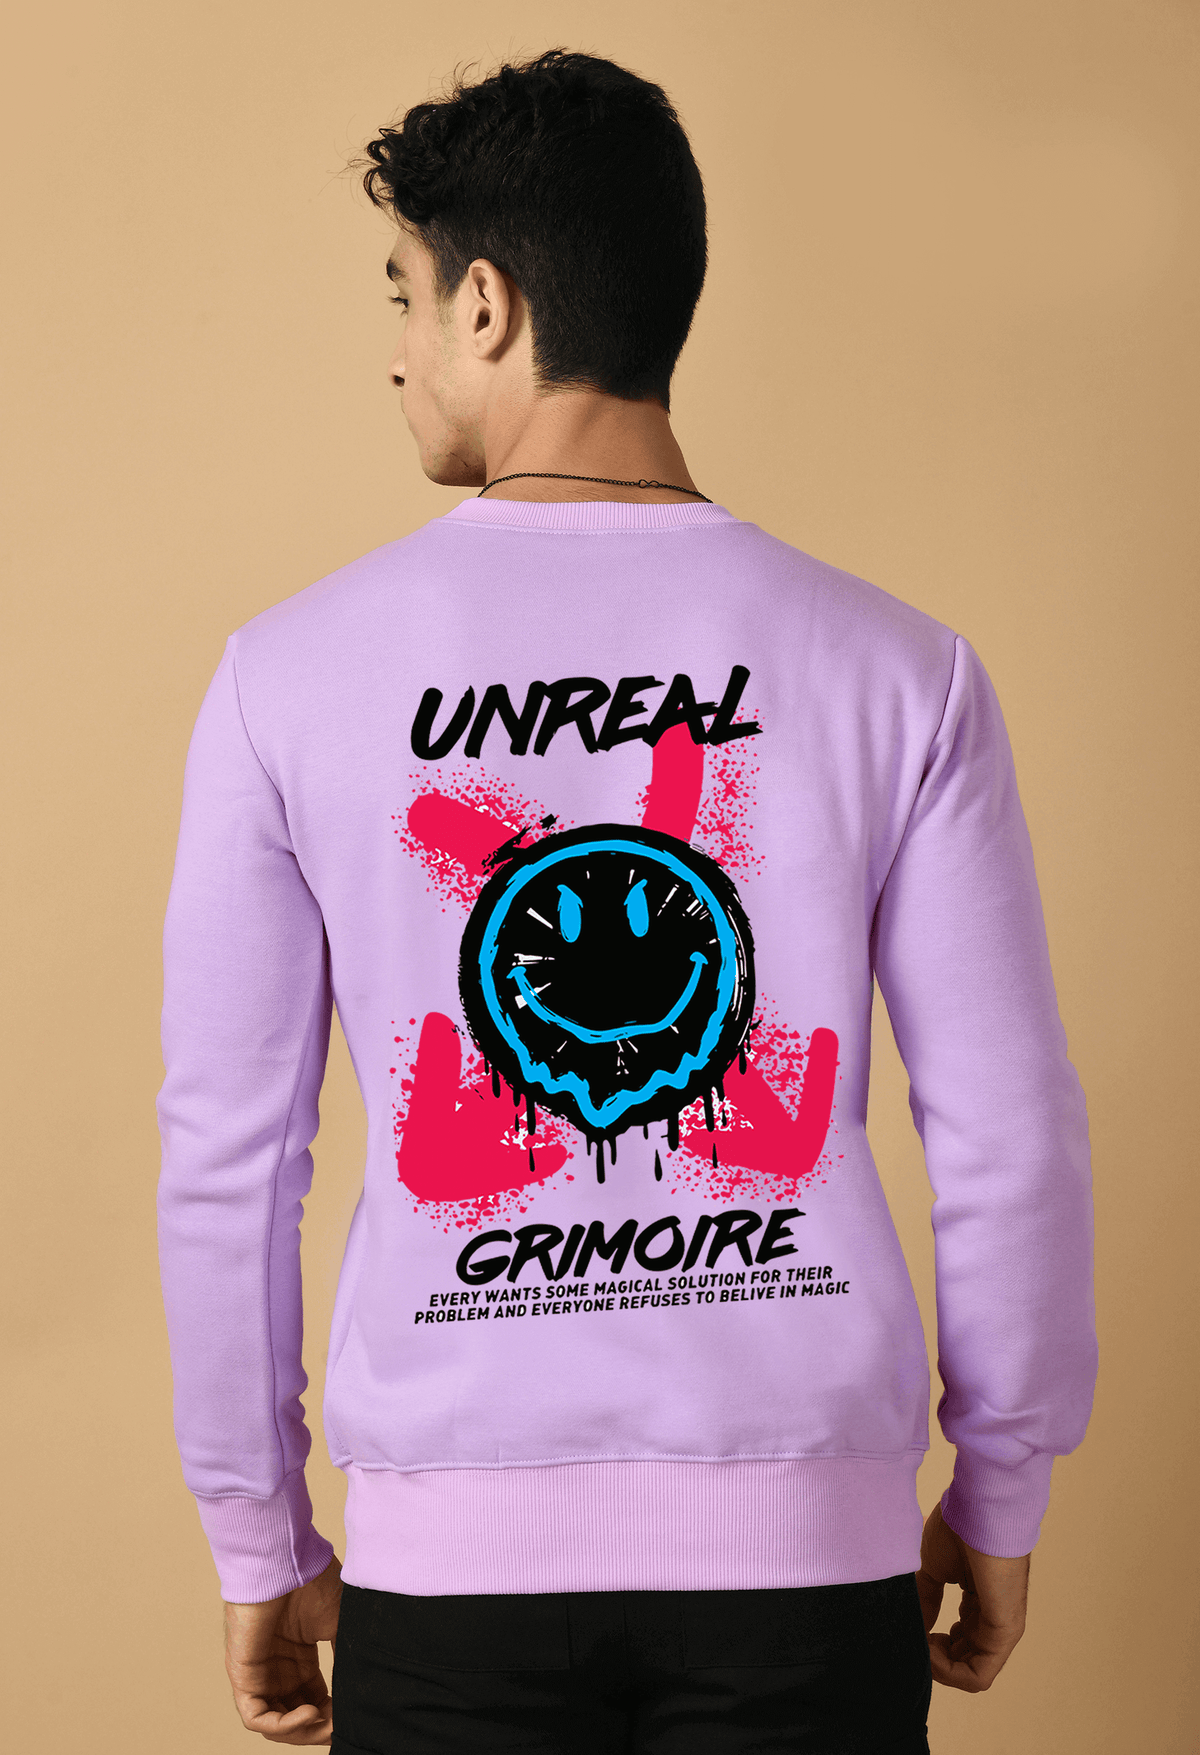 Unreal printed lavender color sweatshirt by offmint